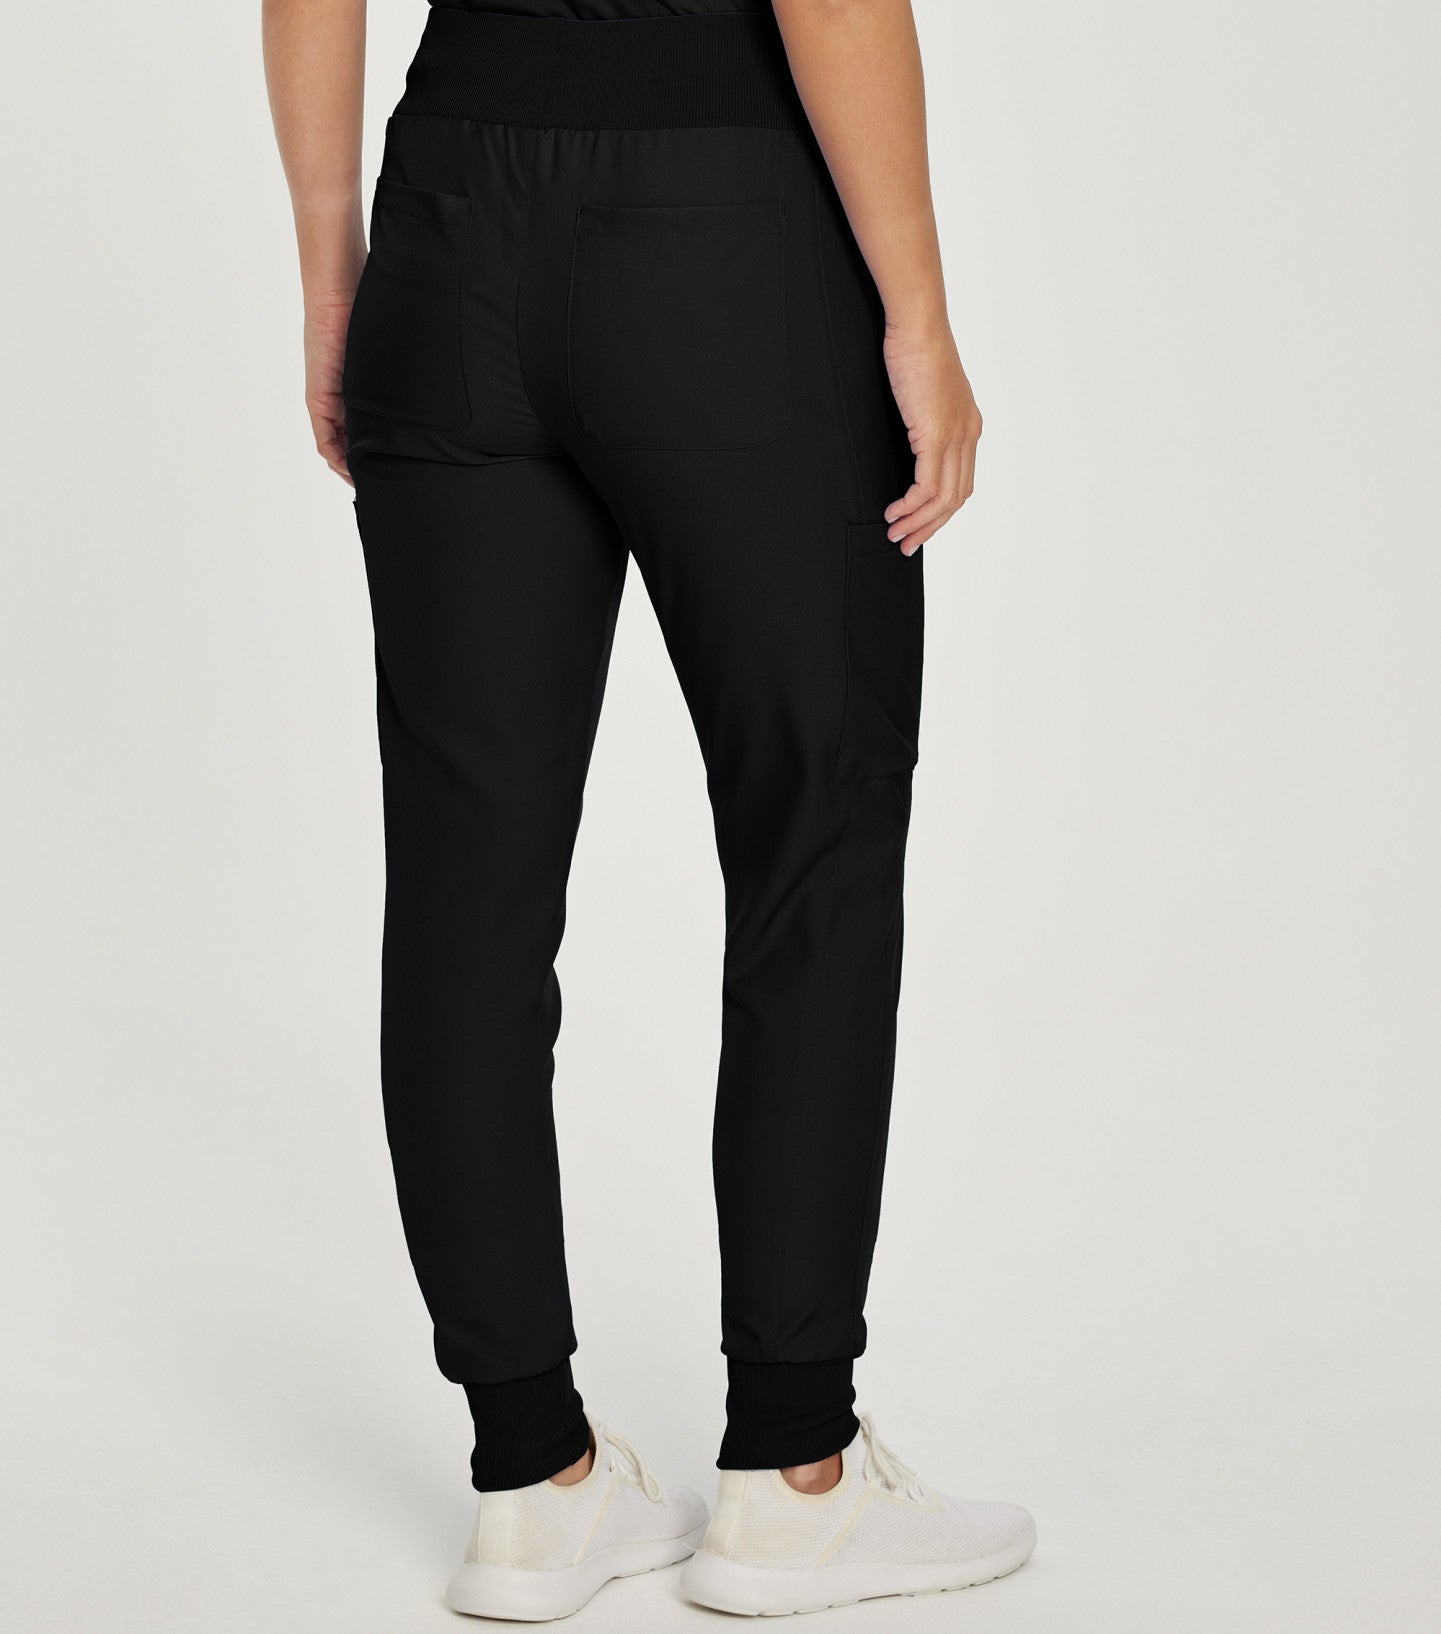 9 Best Yoga Pants For Short Legs Of 2023  Reviews  Buying Guide